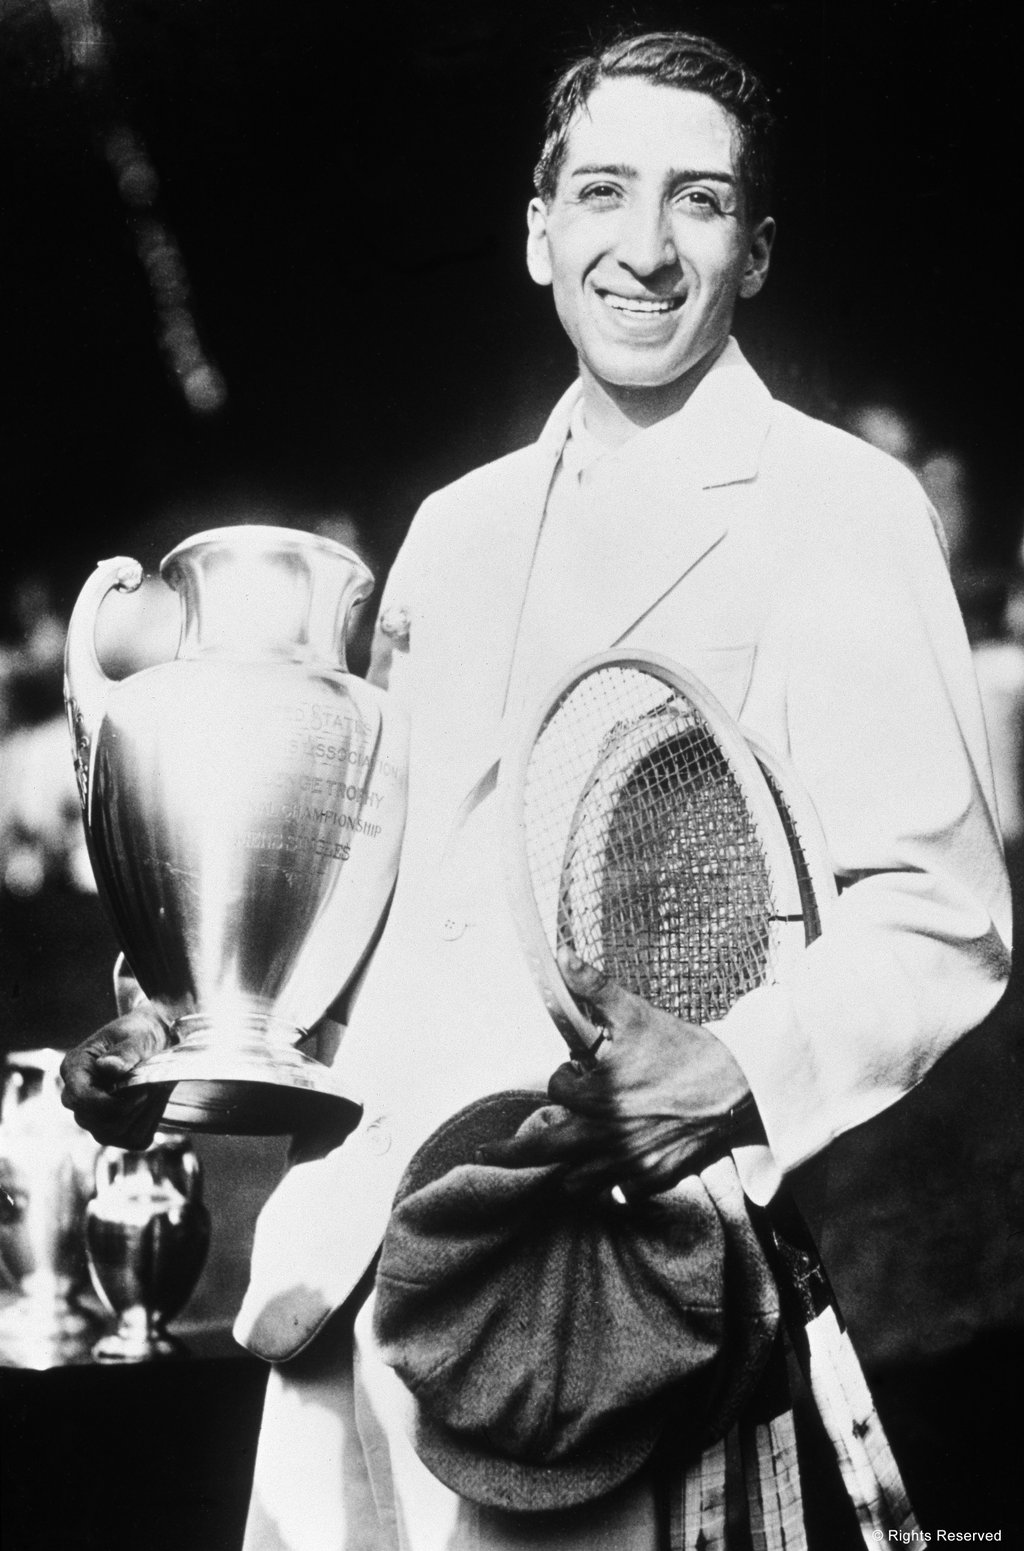 Lacoste on Twitter: "Happy to the legendary tennis player, René Lacoste. Discover more here: https://t.co/DnoMH8Y0hp © Lacoste Archives https://t.co/B5fjYGr8hL" / Twitter